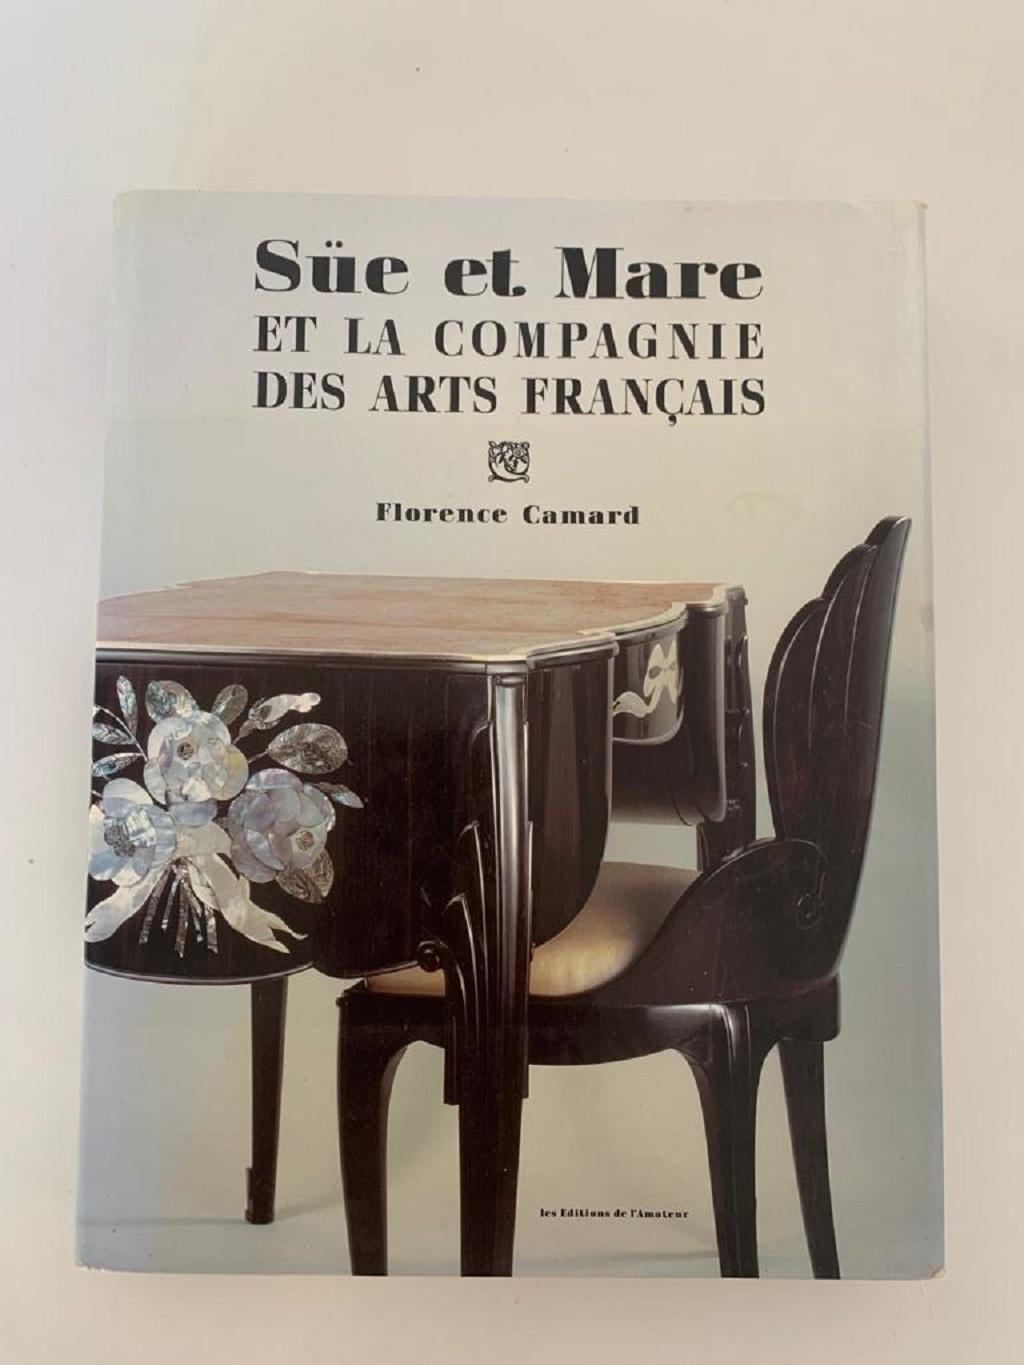 Paris: Editions de Amateur, 1993. First printing. Hardcover. Monograph dedicated to Louis Süe and André Mare who, in 1919, founded the Compagnie des Arts Français. Their collaboration lasted until 1927. In appendix: 30 pages of directory of their